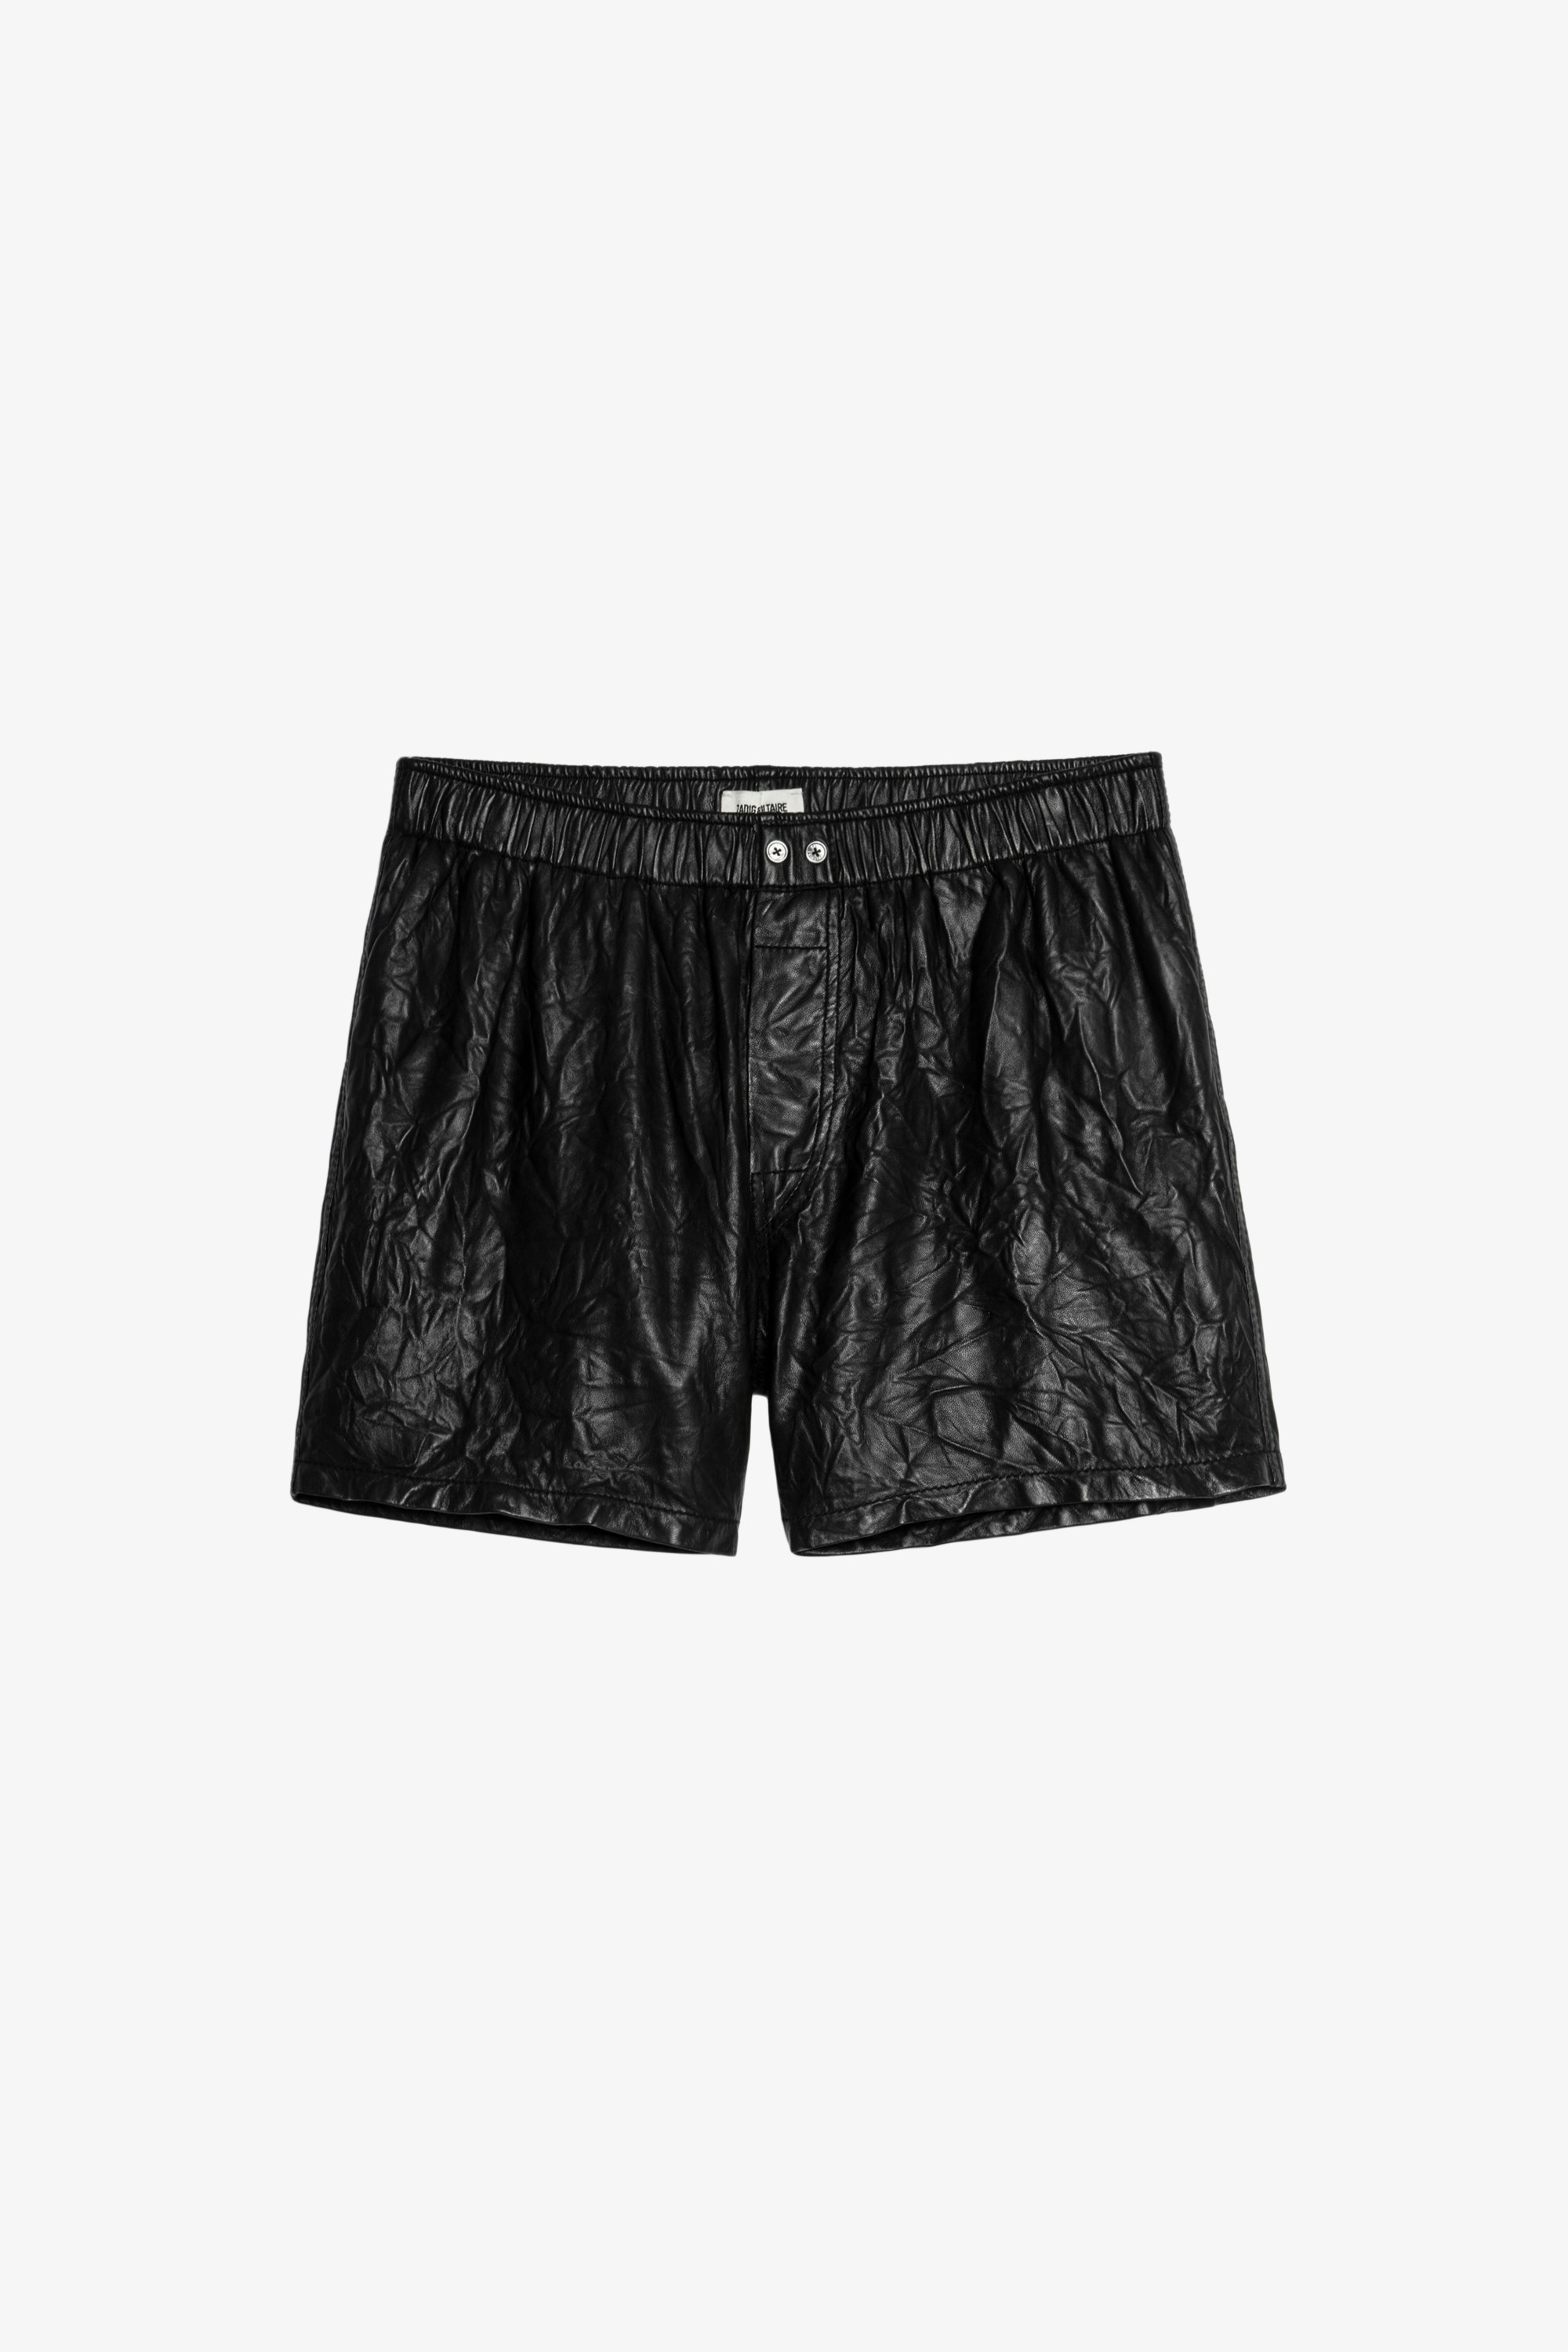 Pax Shorts Crinkled Leather - Women’s black leather shorts.